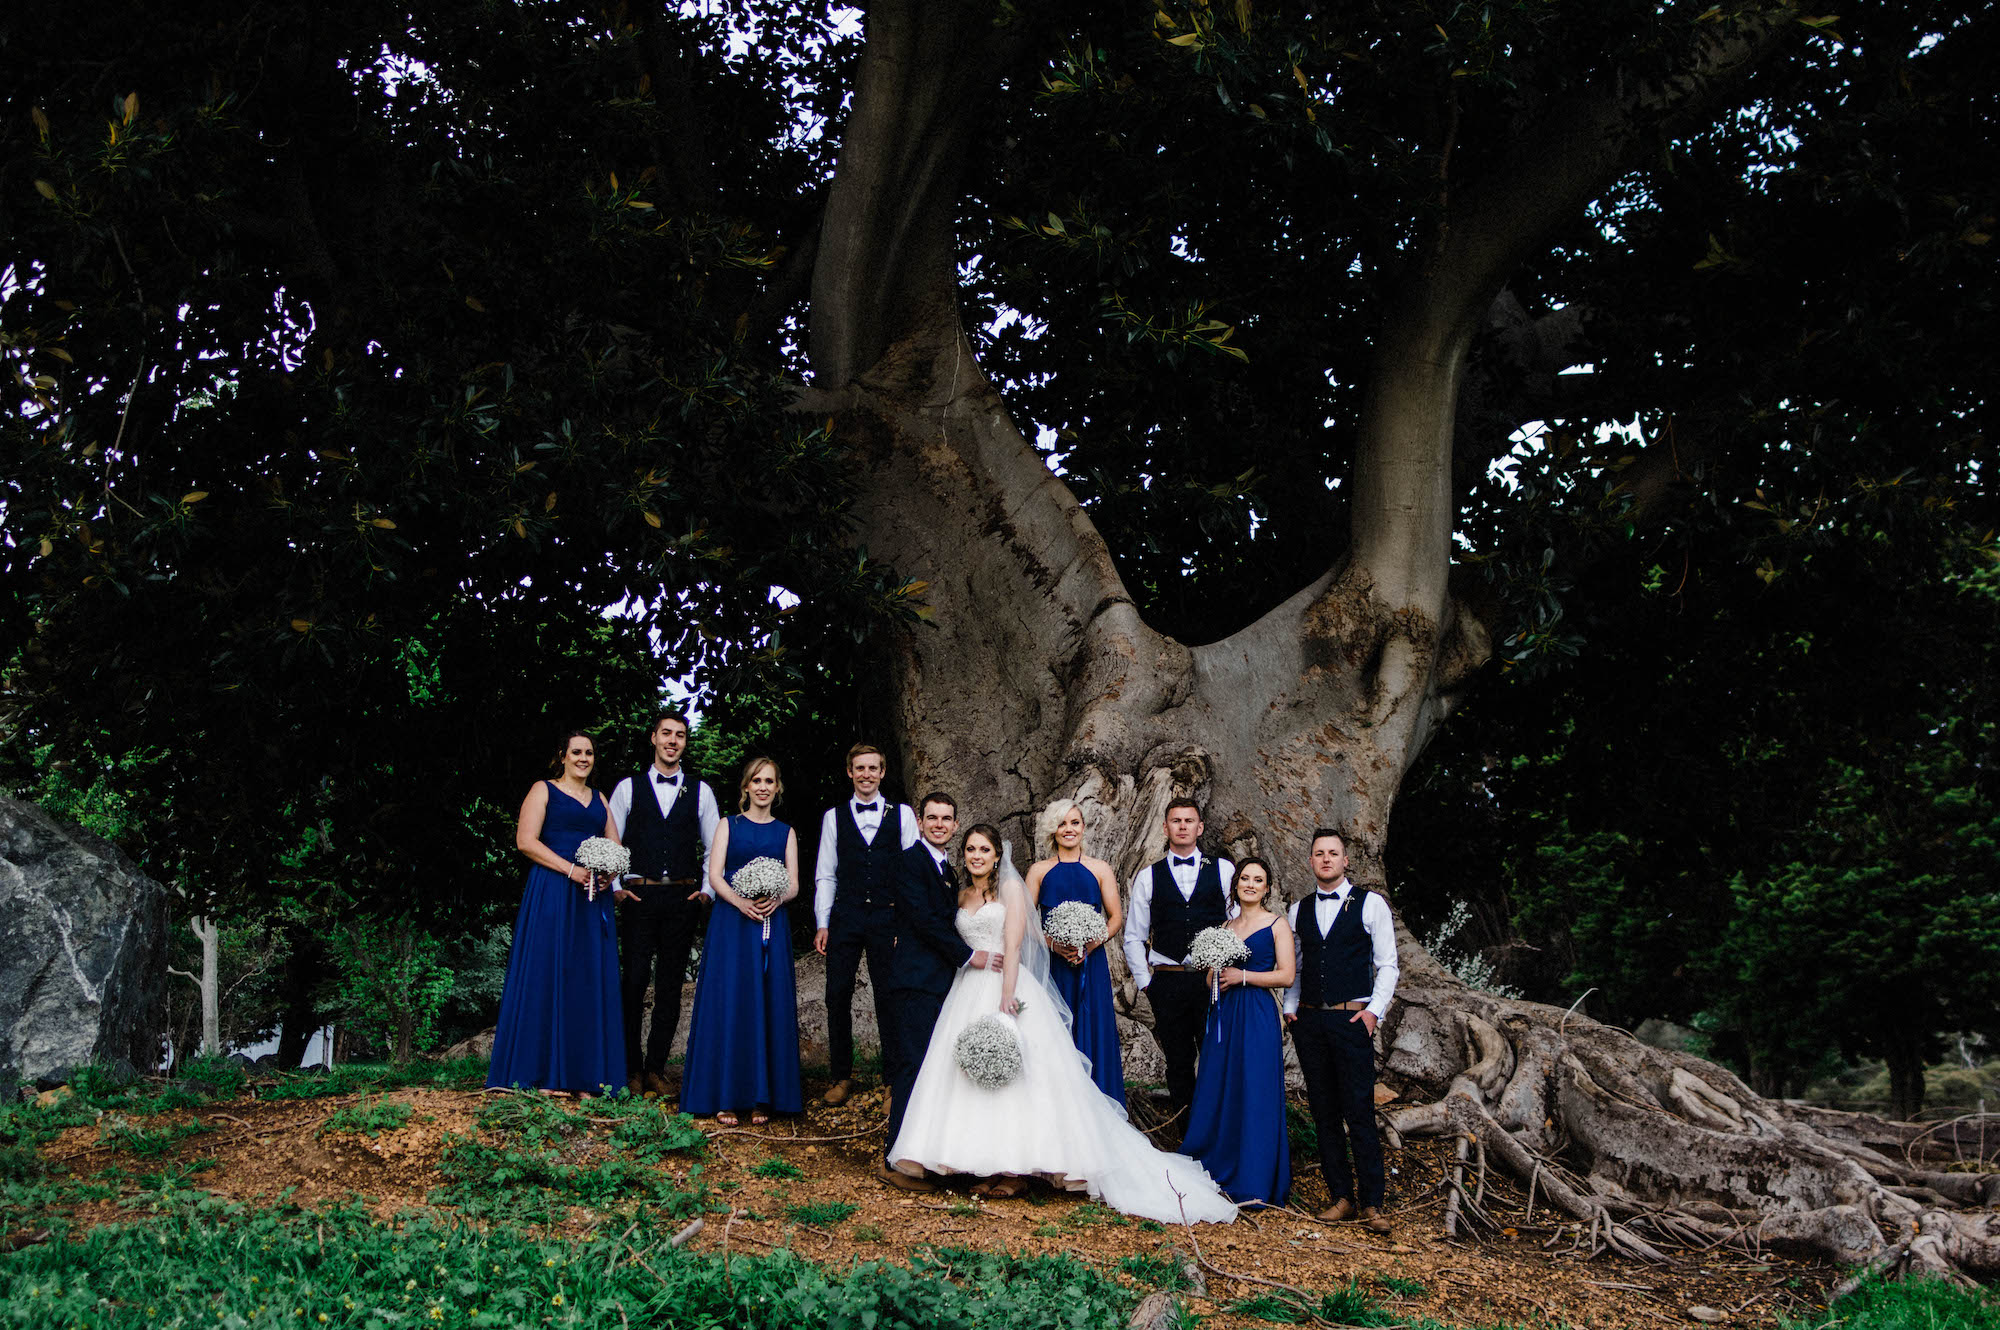 A wedding photo of the bridal party standing together underneath a Moreton Bay Fig Tree.